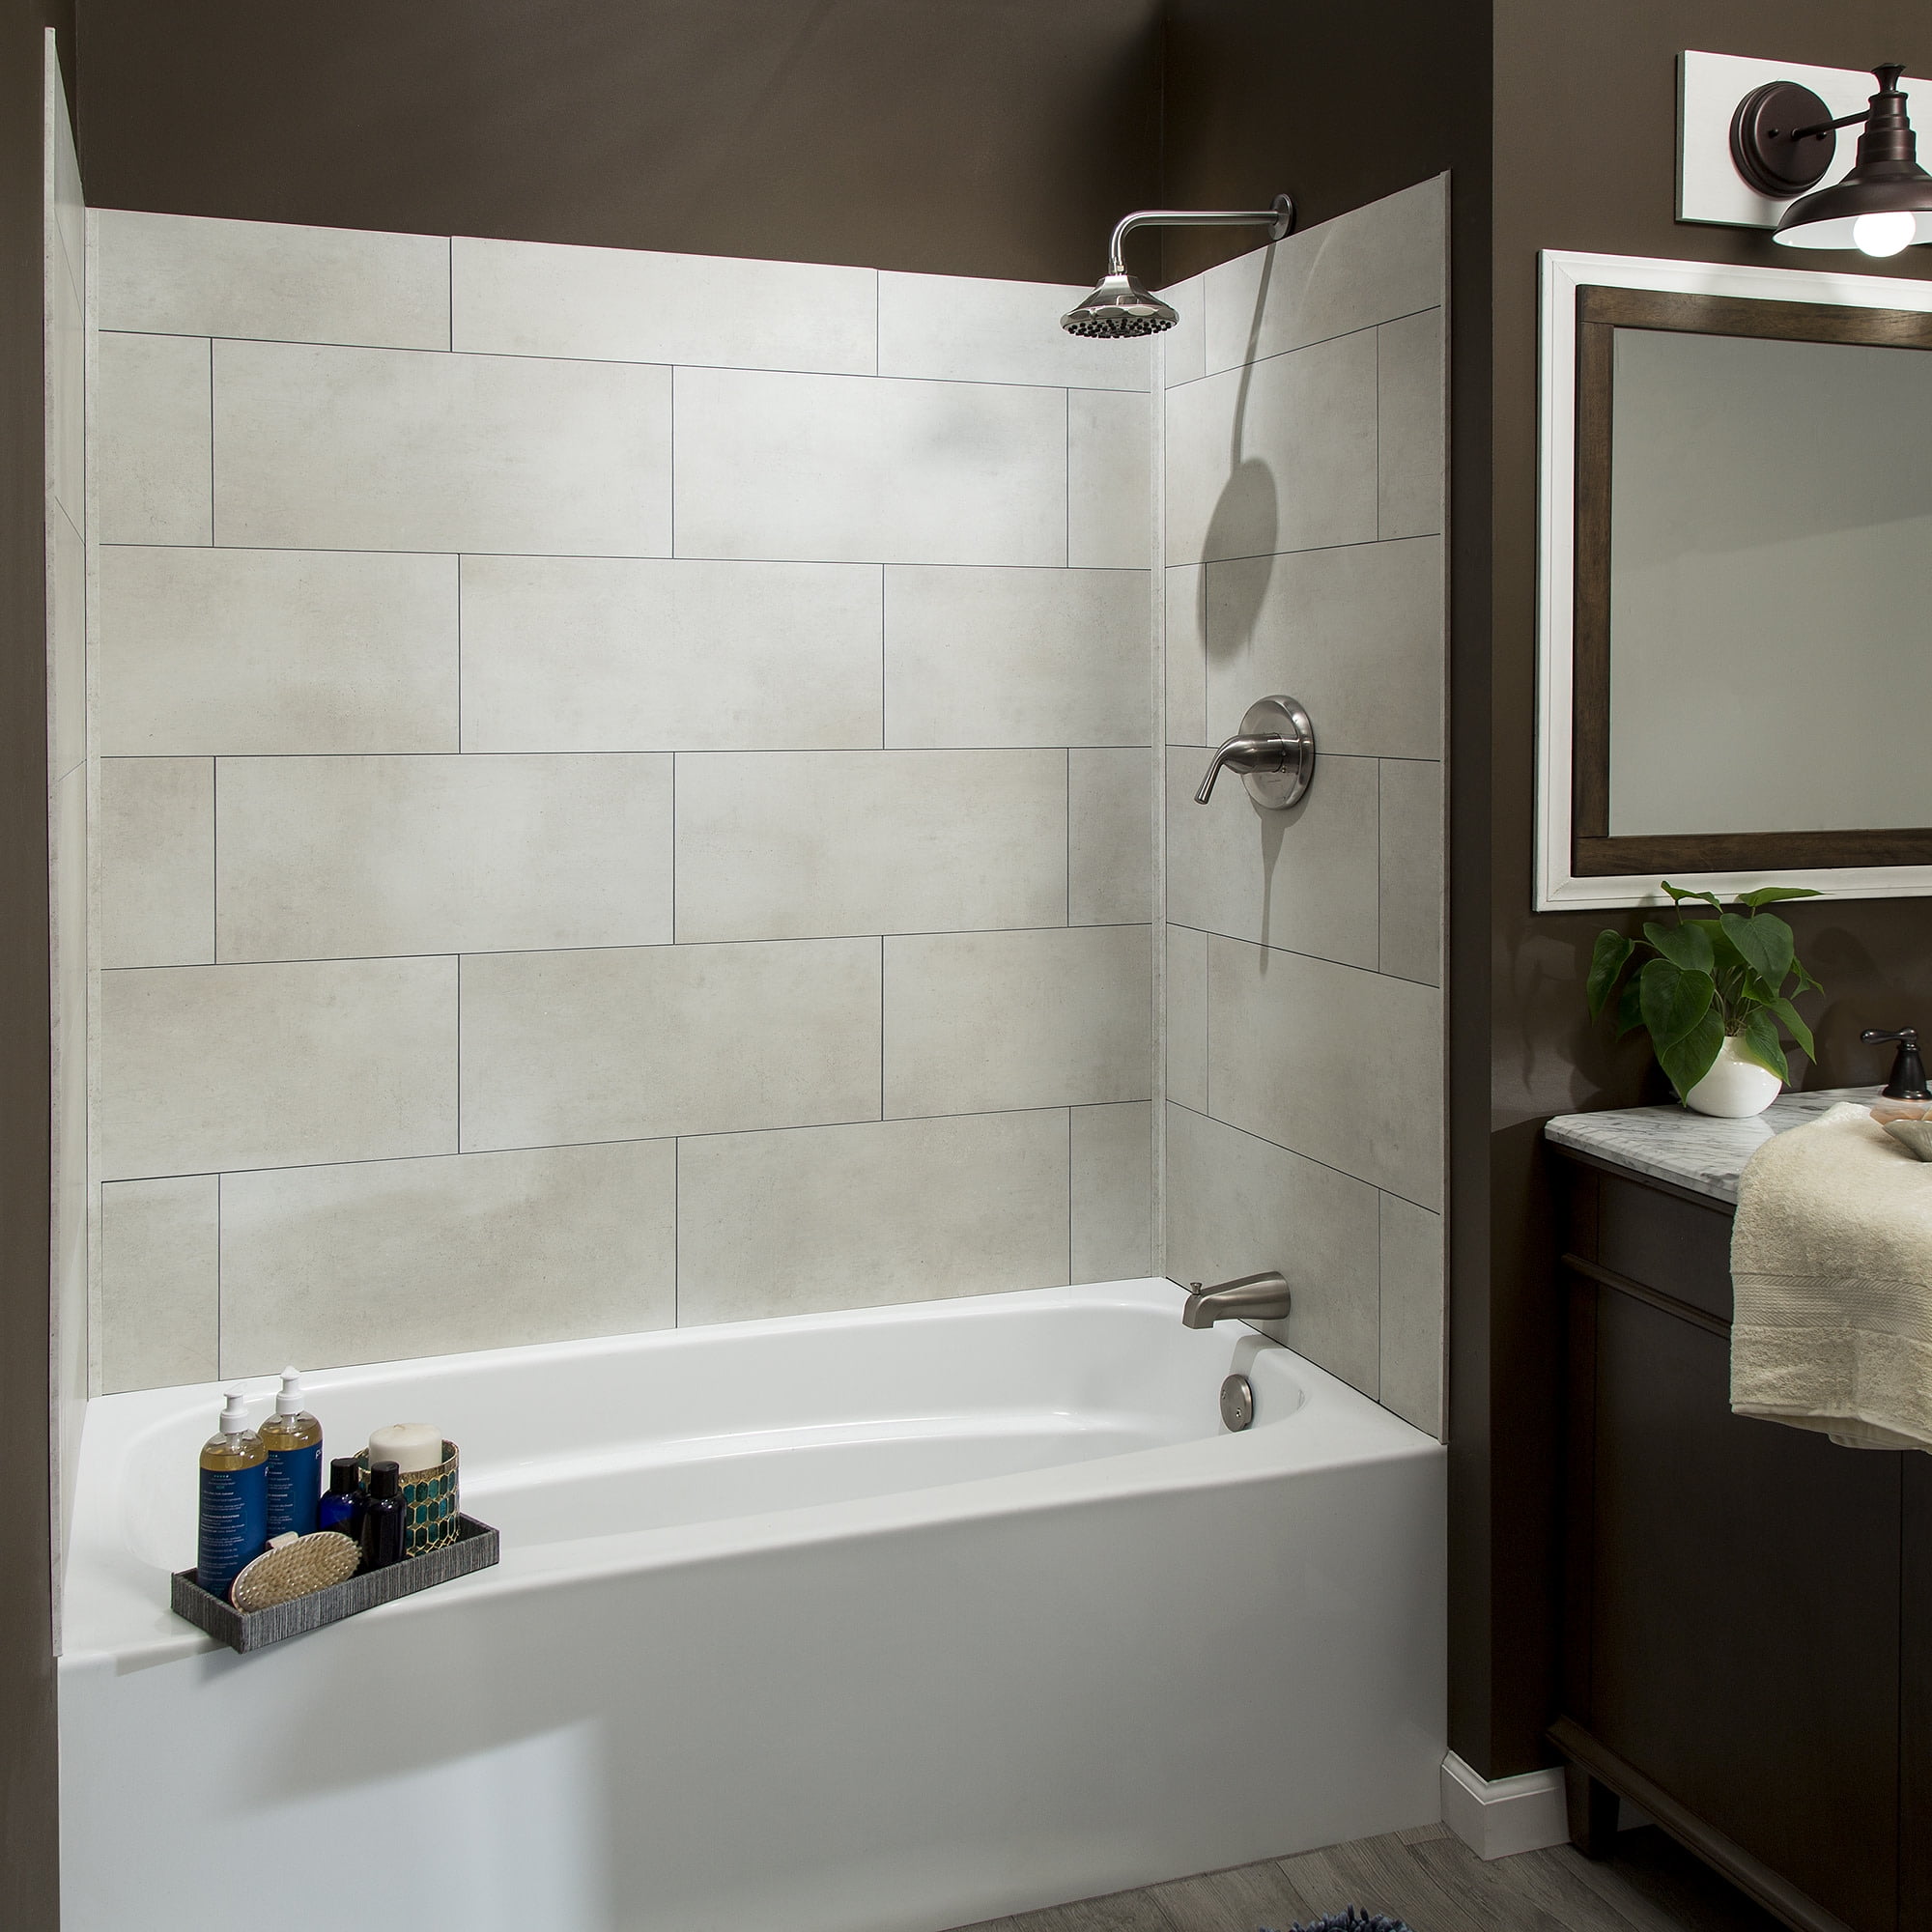 Palisade 23.2 in. x 11.1 in. Interlocking Vinyl Tile Shower and Tub Surround Kit in Wintry Mix